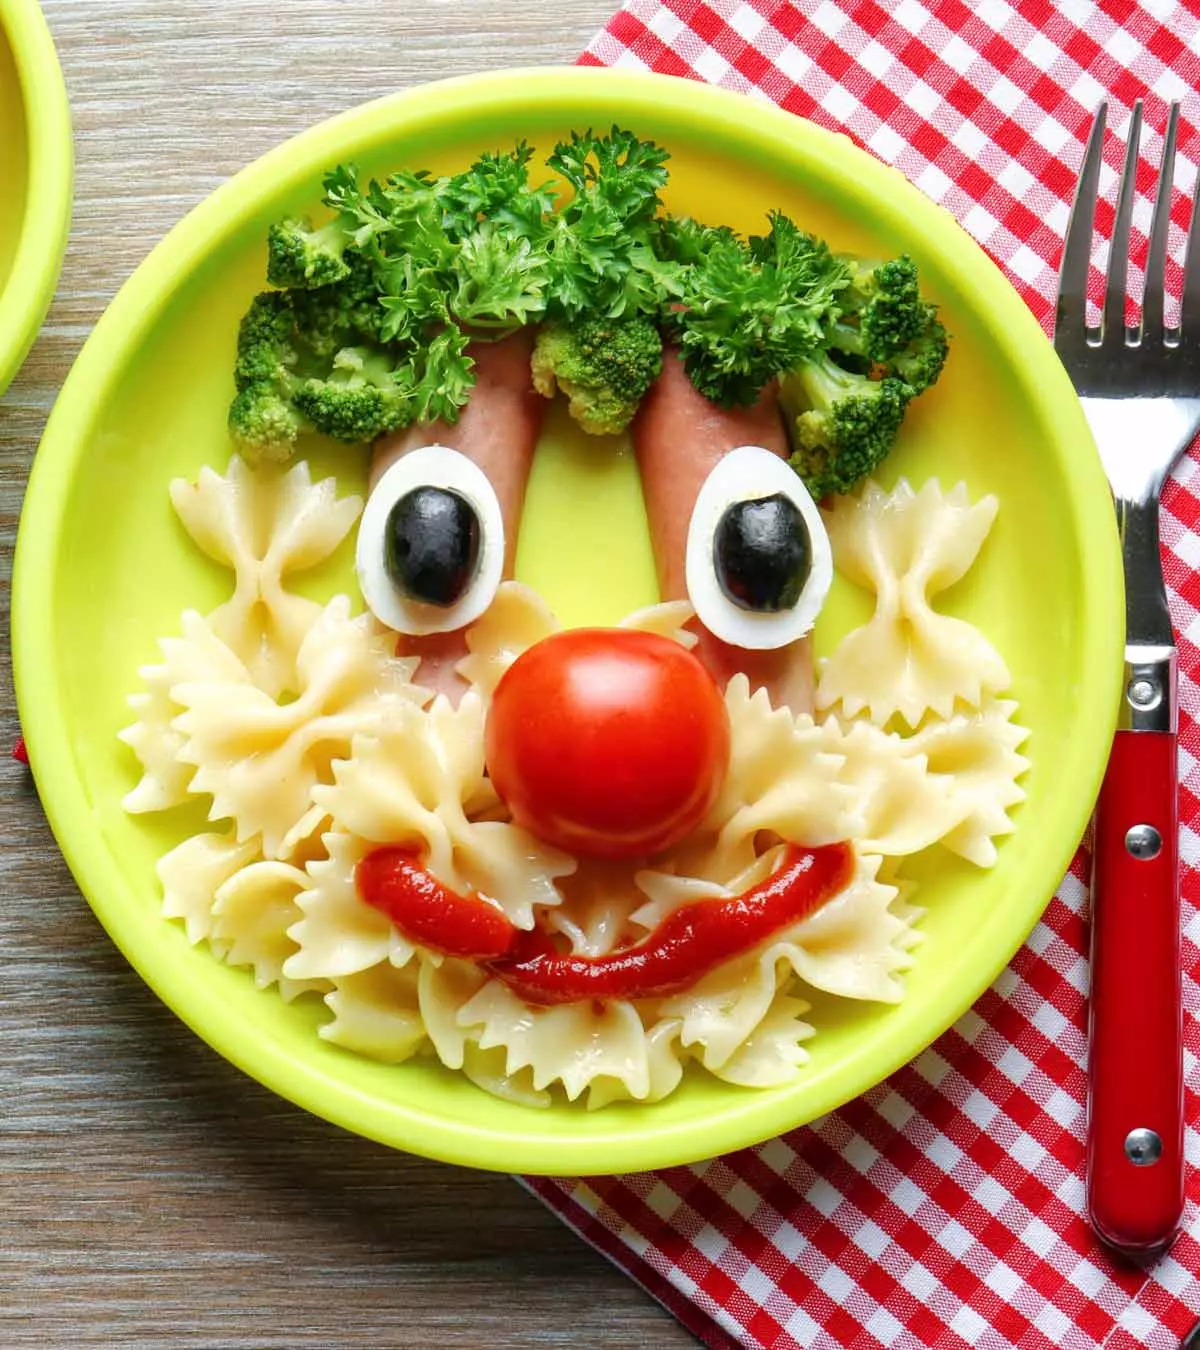 image-photo/plate-creative-pasta-children-on-table-600239945